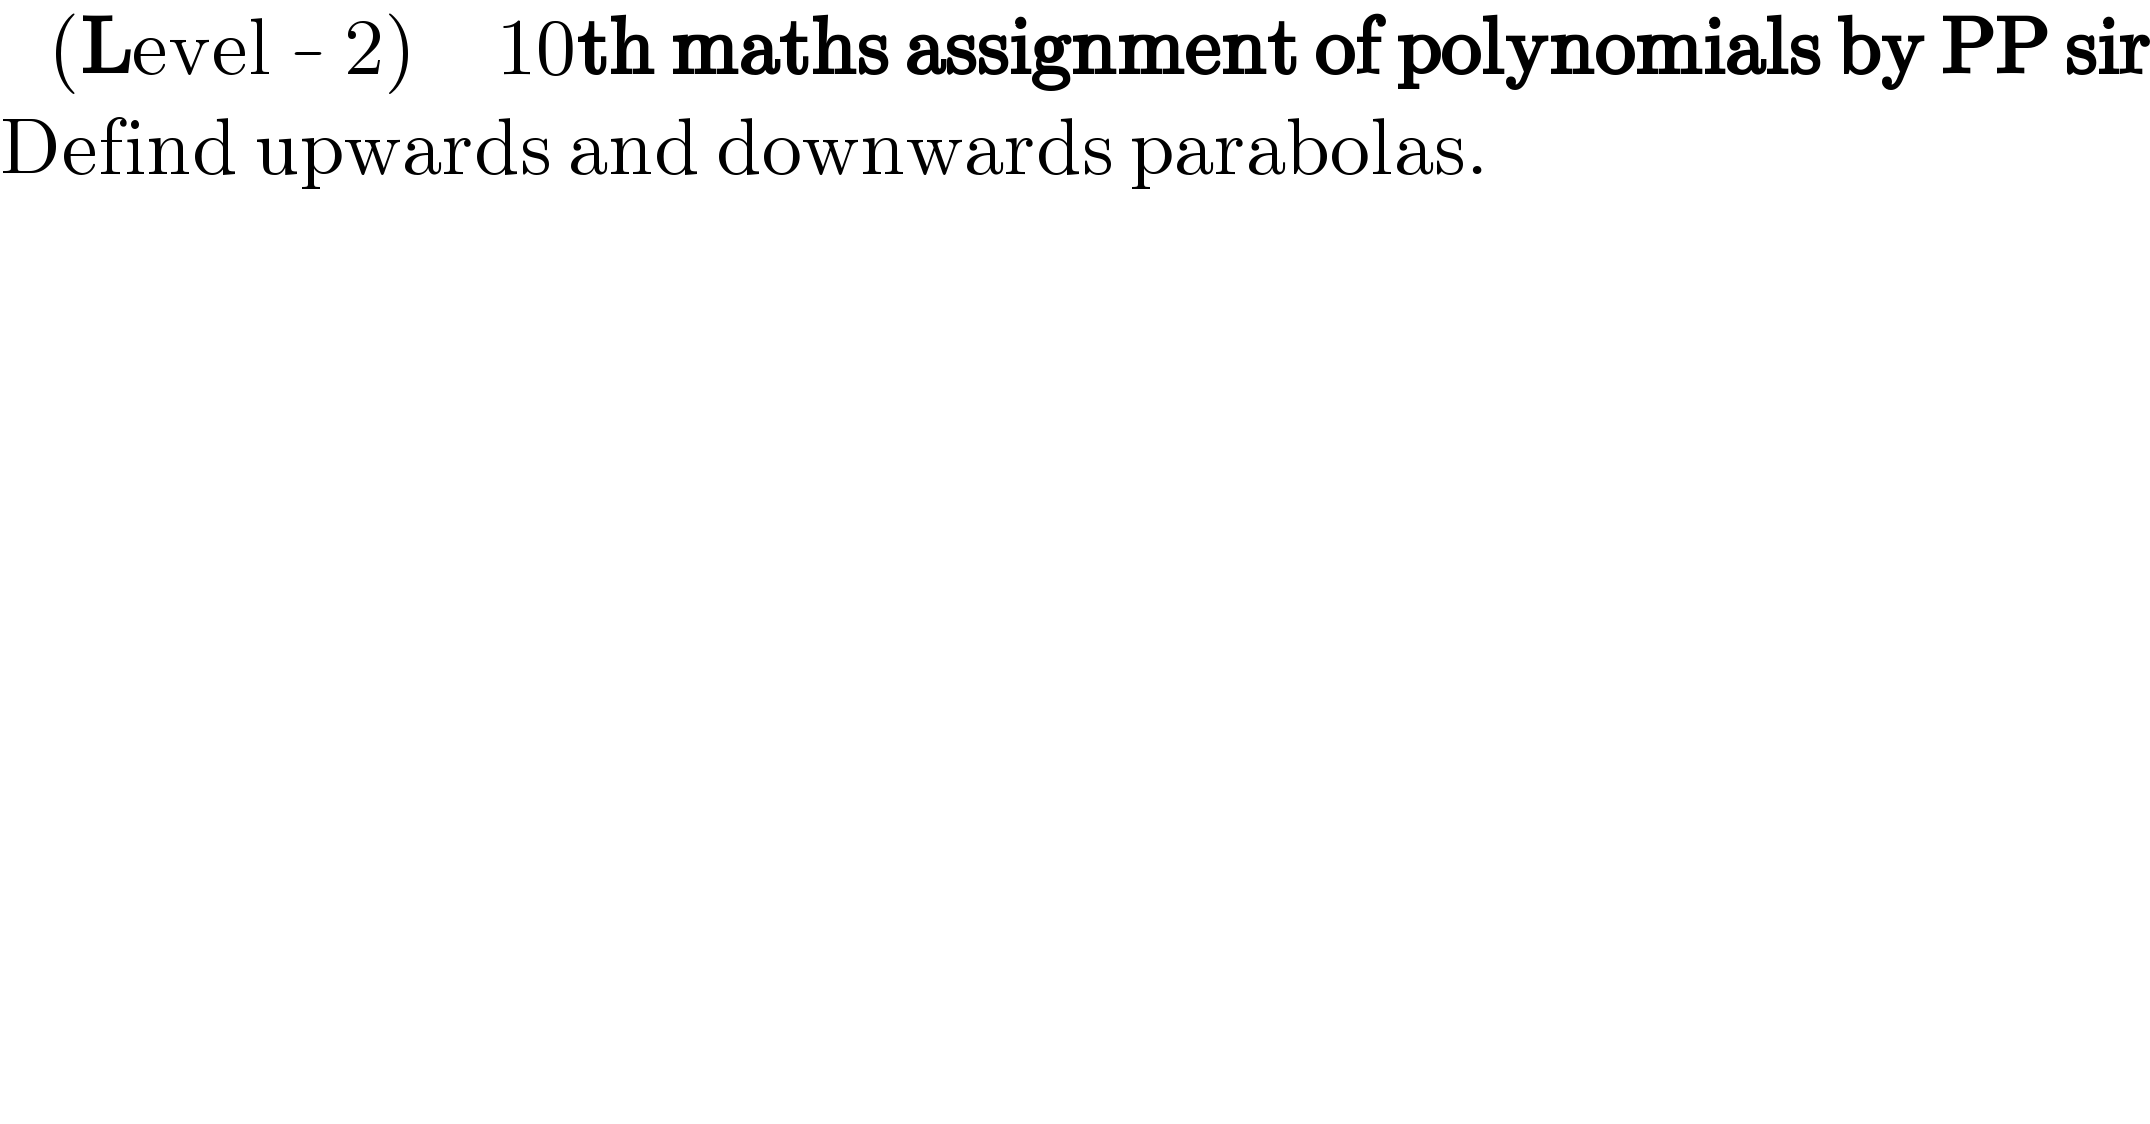    (Level - 2)     10th maths assignment of polynomials by PP sir  Defind upwards and downwards parabolas.      